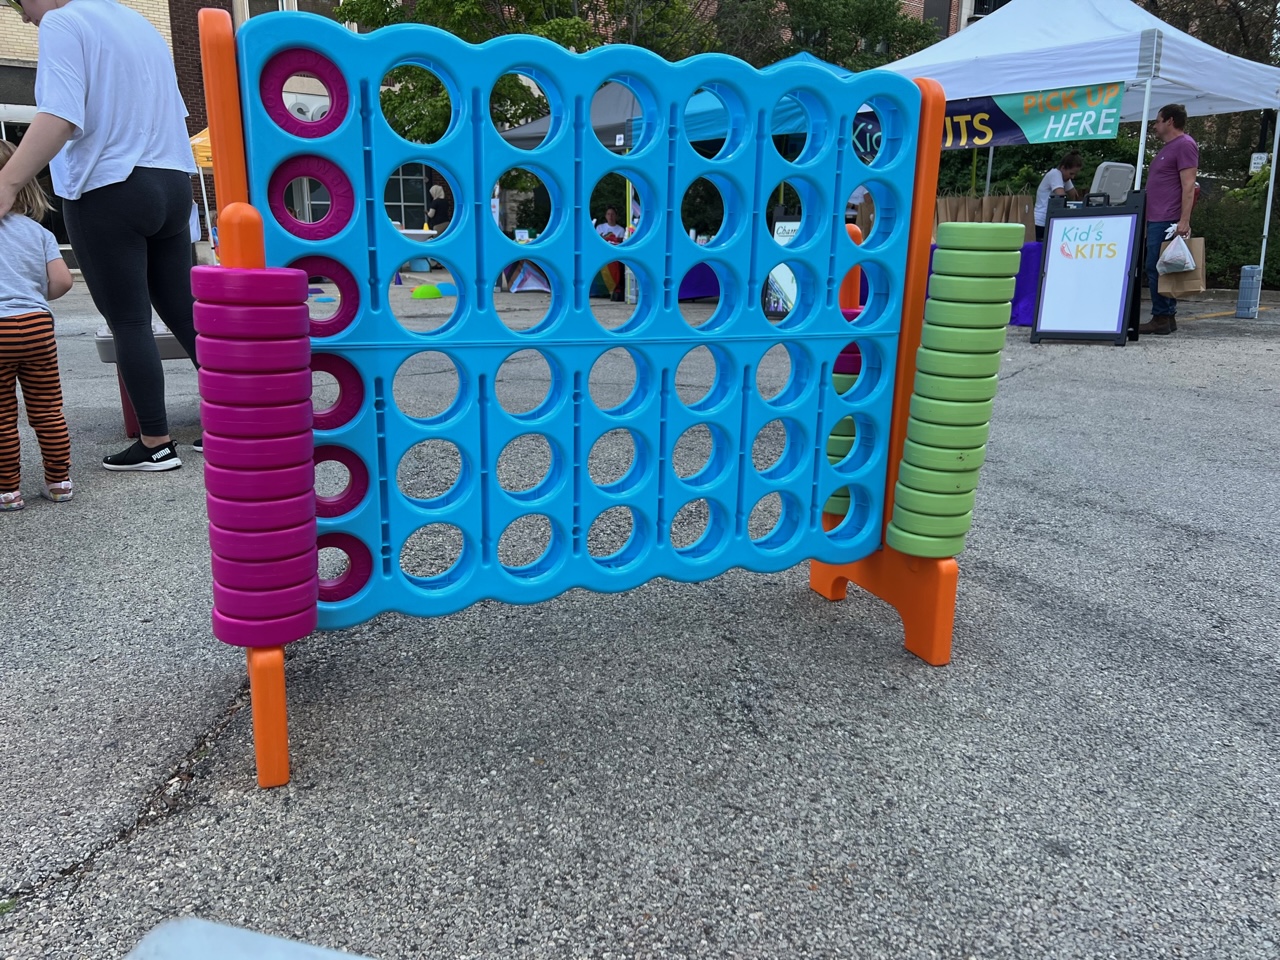 In parking lot M in Downtown Champaign, there is a giant Connect Four game. Photo by Alyssa Buckley.